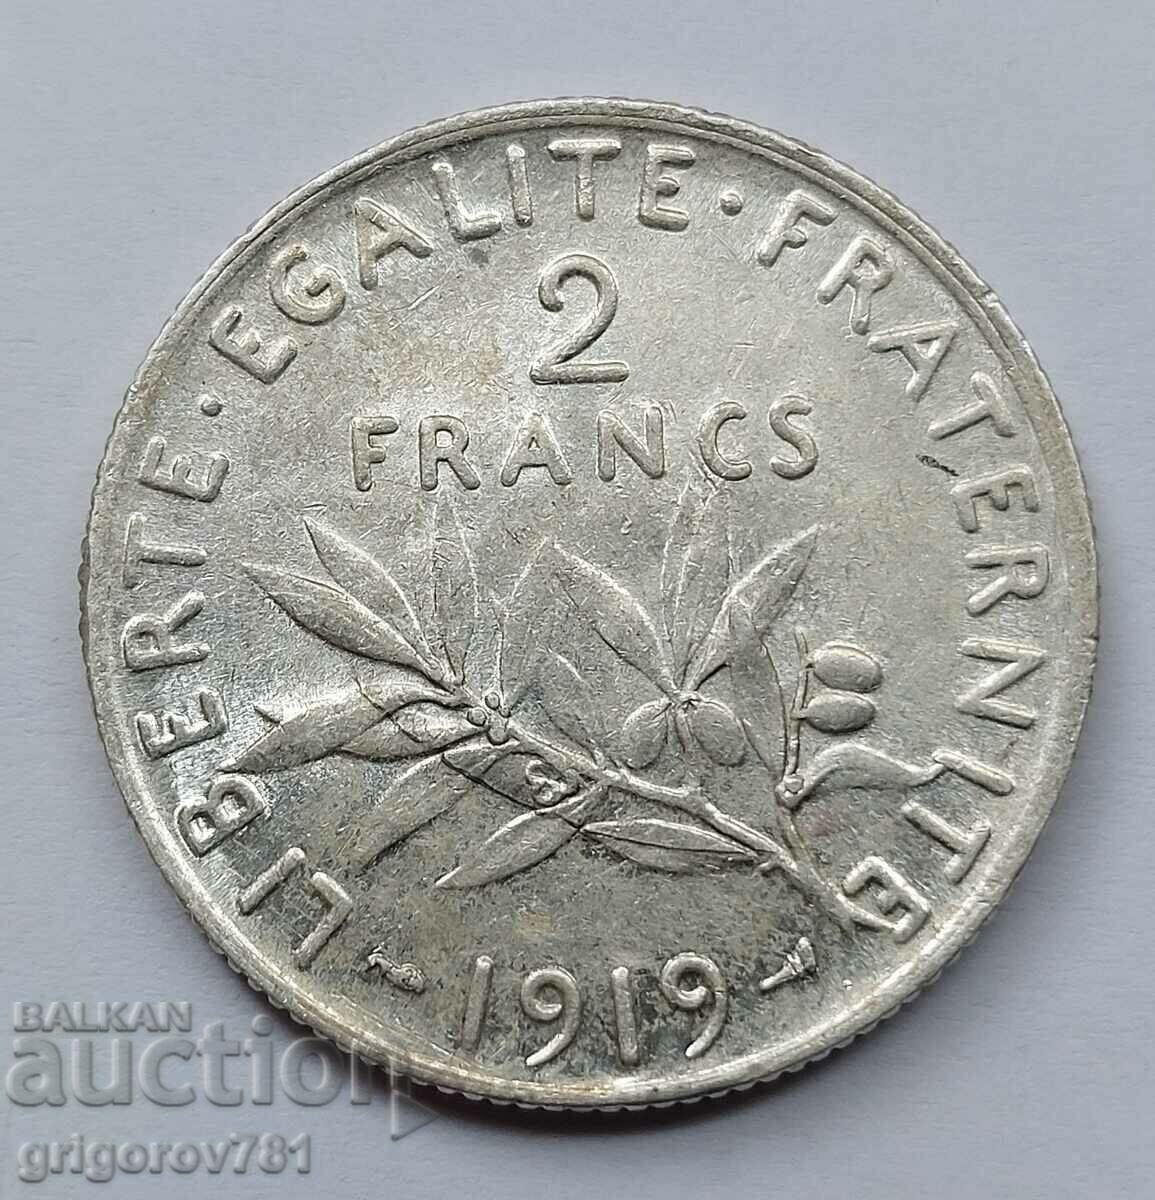 2 Francs Silver France 1919 - Silver Coin #140